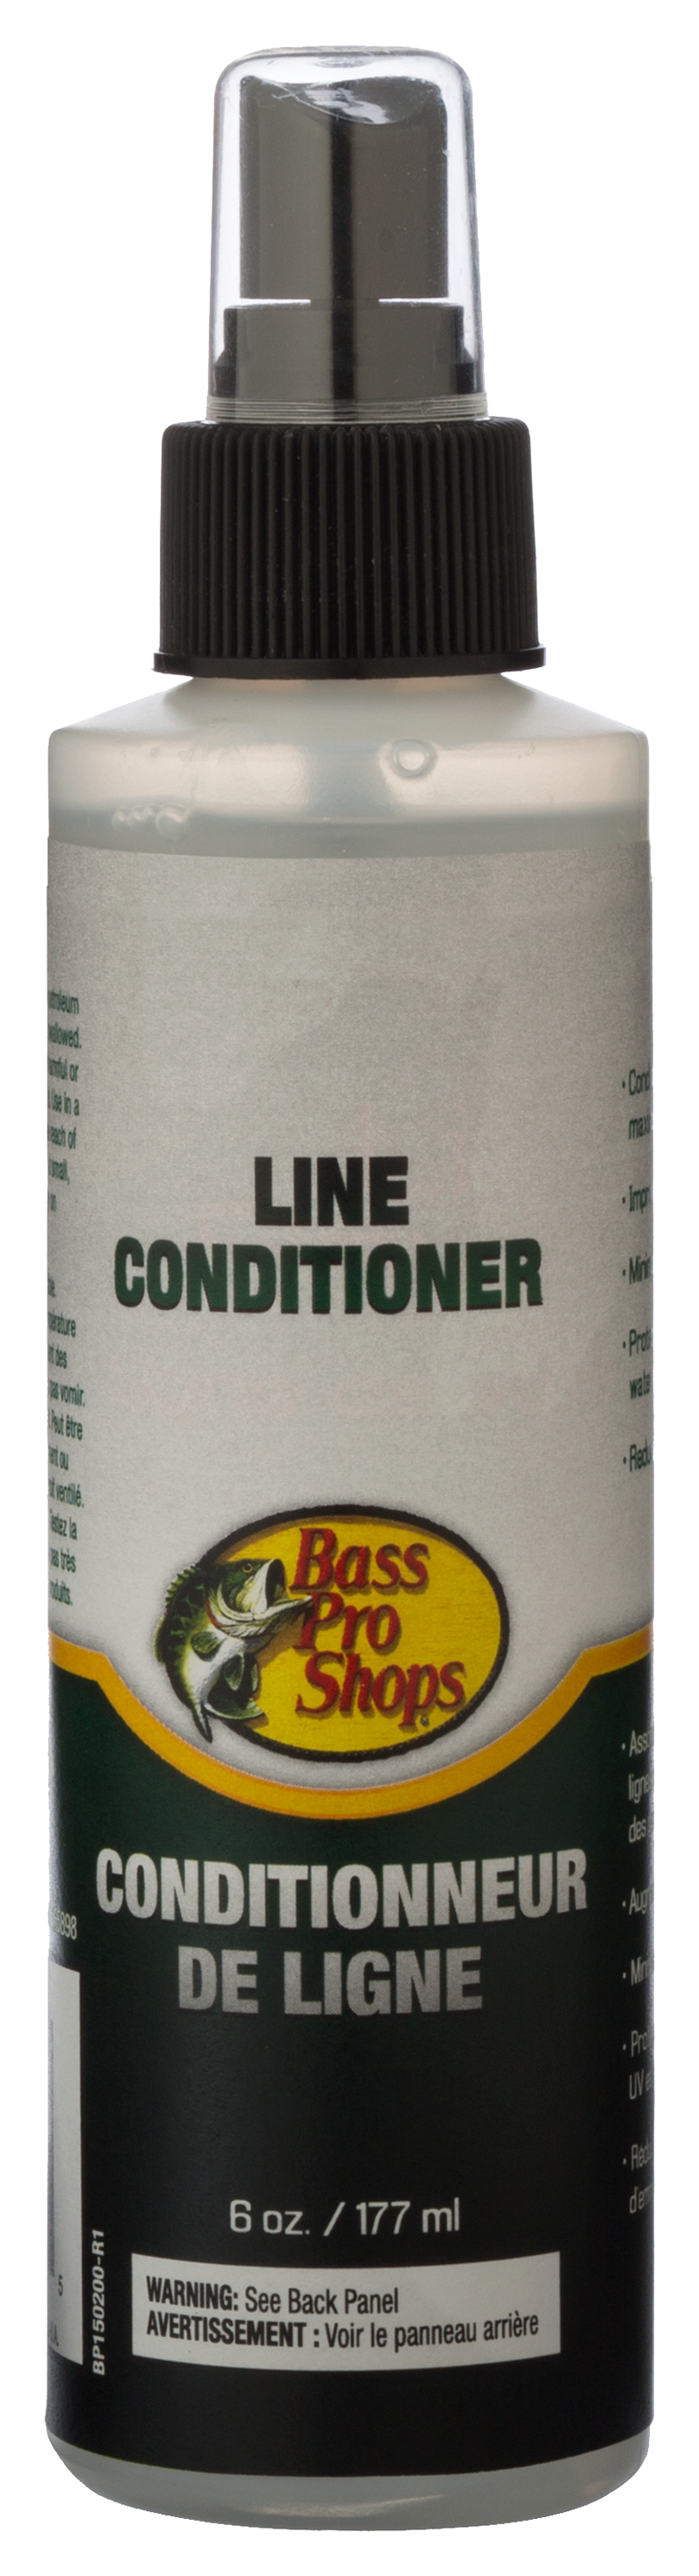  KVD Line and Lure Conditioner, Fishing Line Conditioner Spray  for your Freshwater or Saltwater Fishing Reel, Rod and Tackle Kit